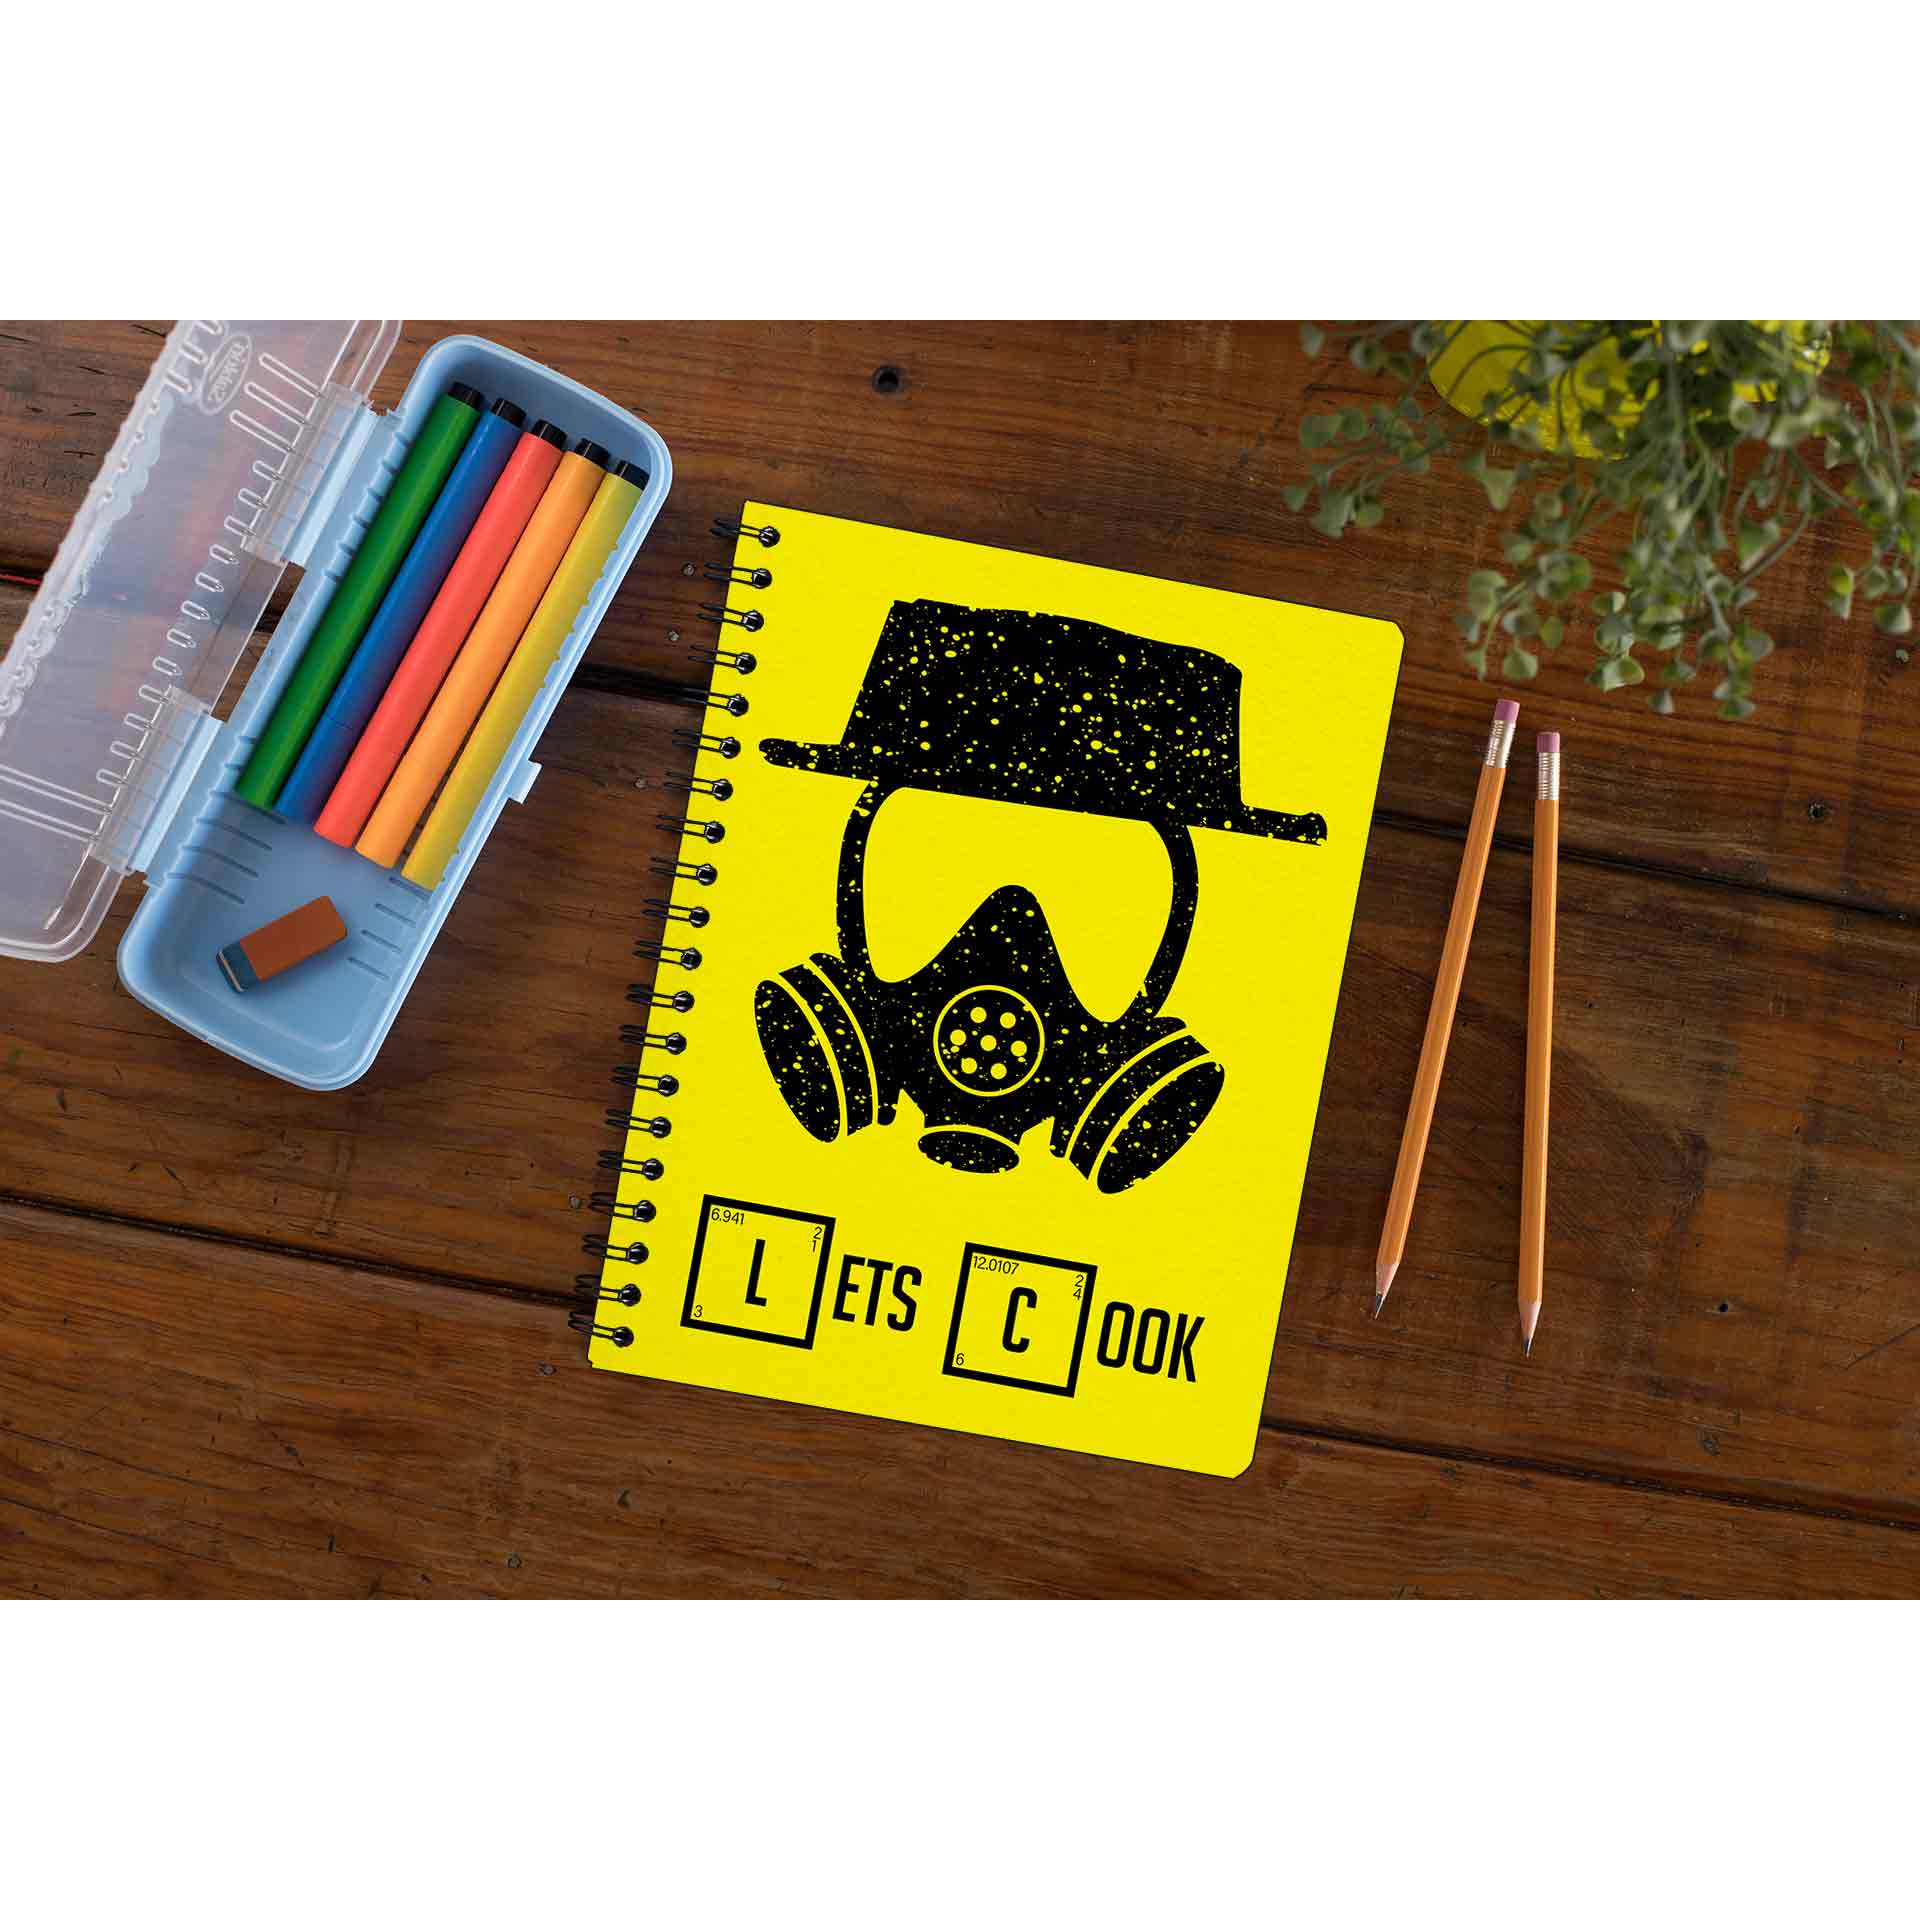 Breaking Bad Notebook by The Banyan Tee TBT - Let's Cook